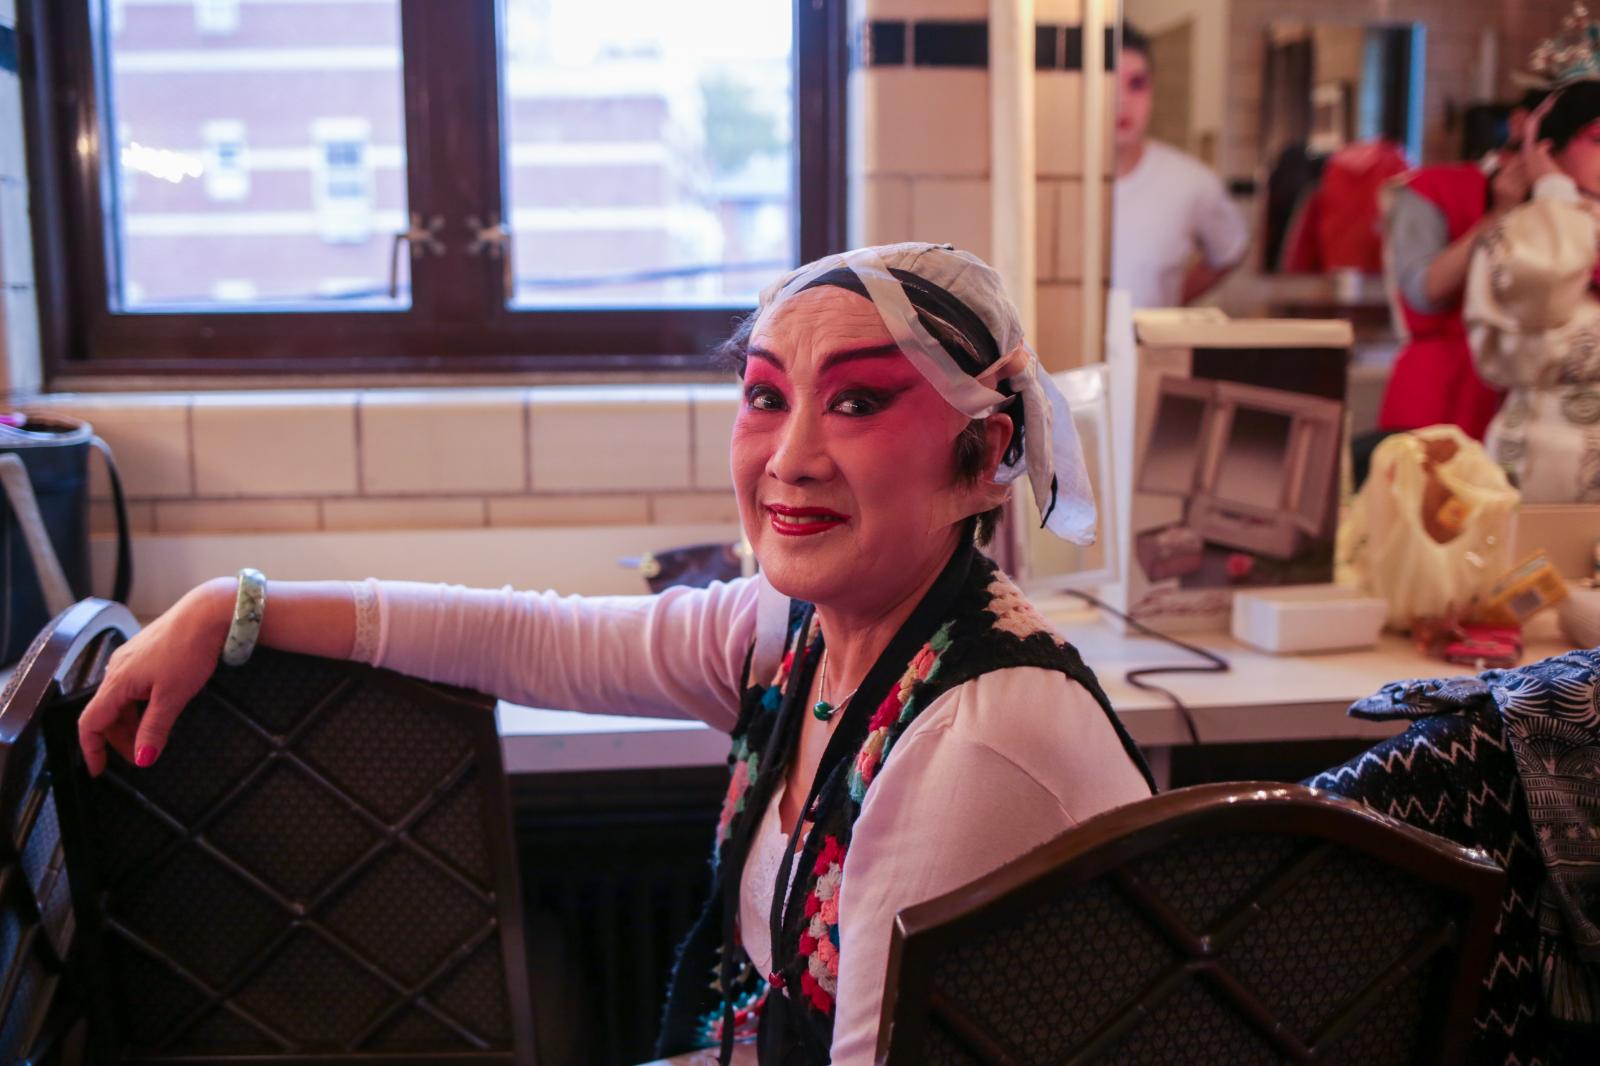 Backstage at the Chinese Opera